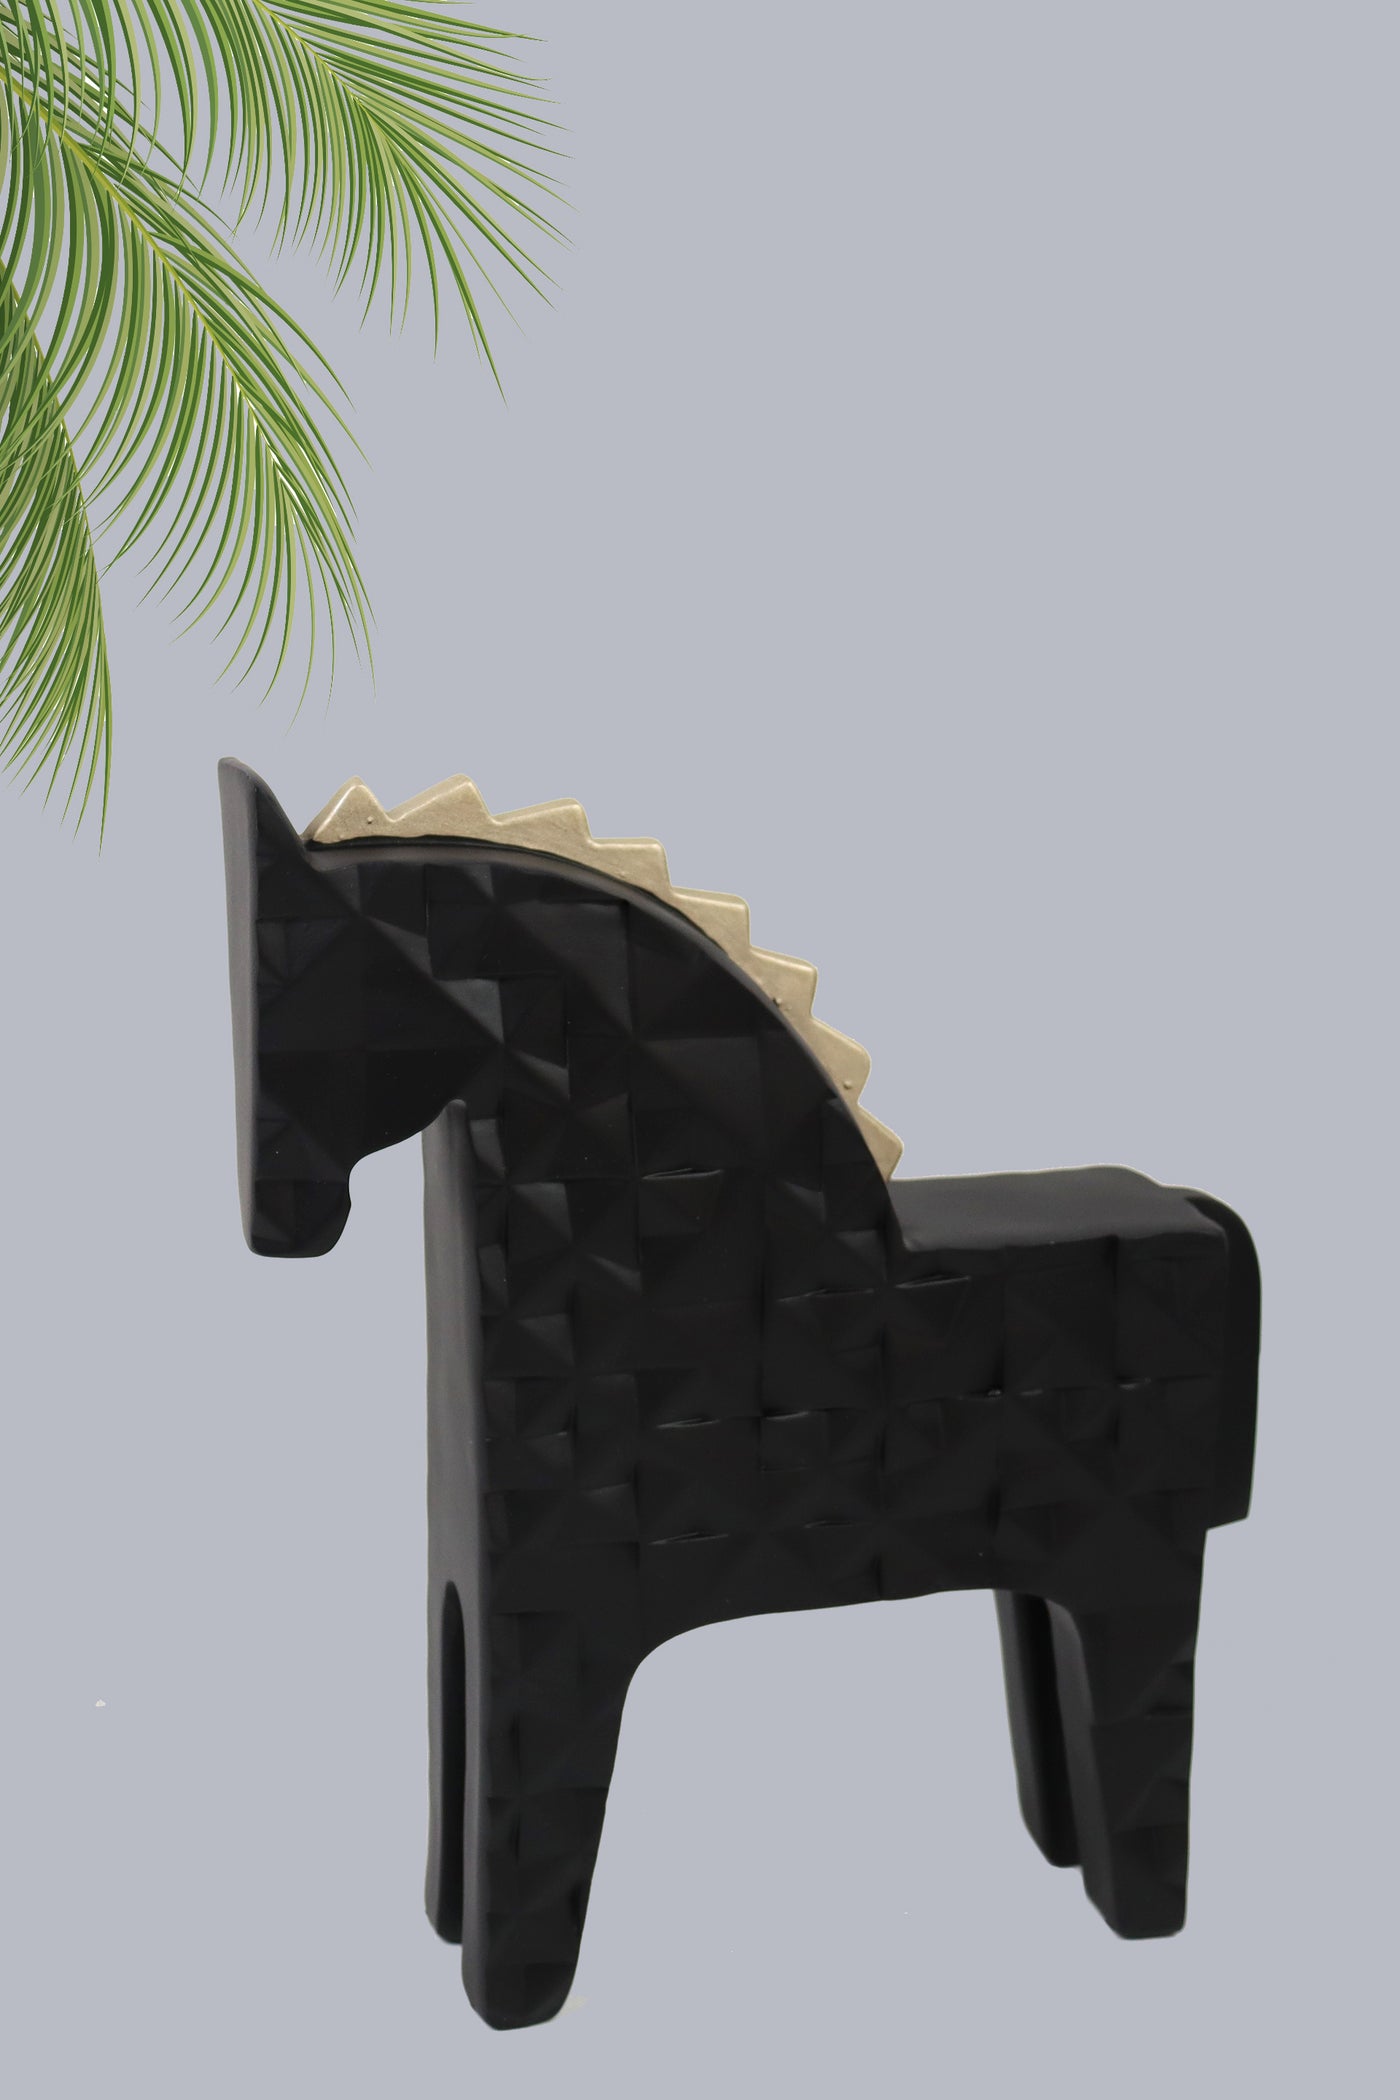 Modern style Resin Horse statue for your home or office decor